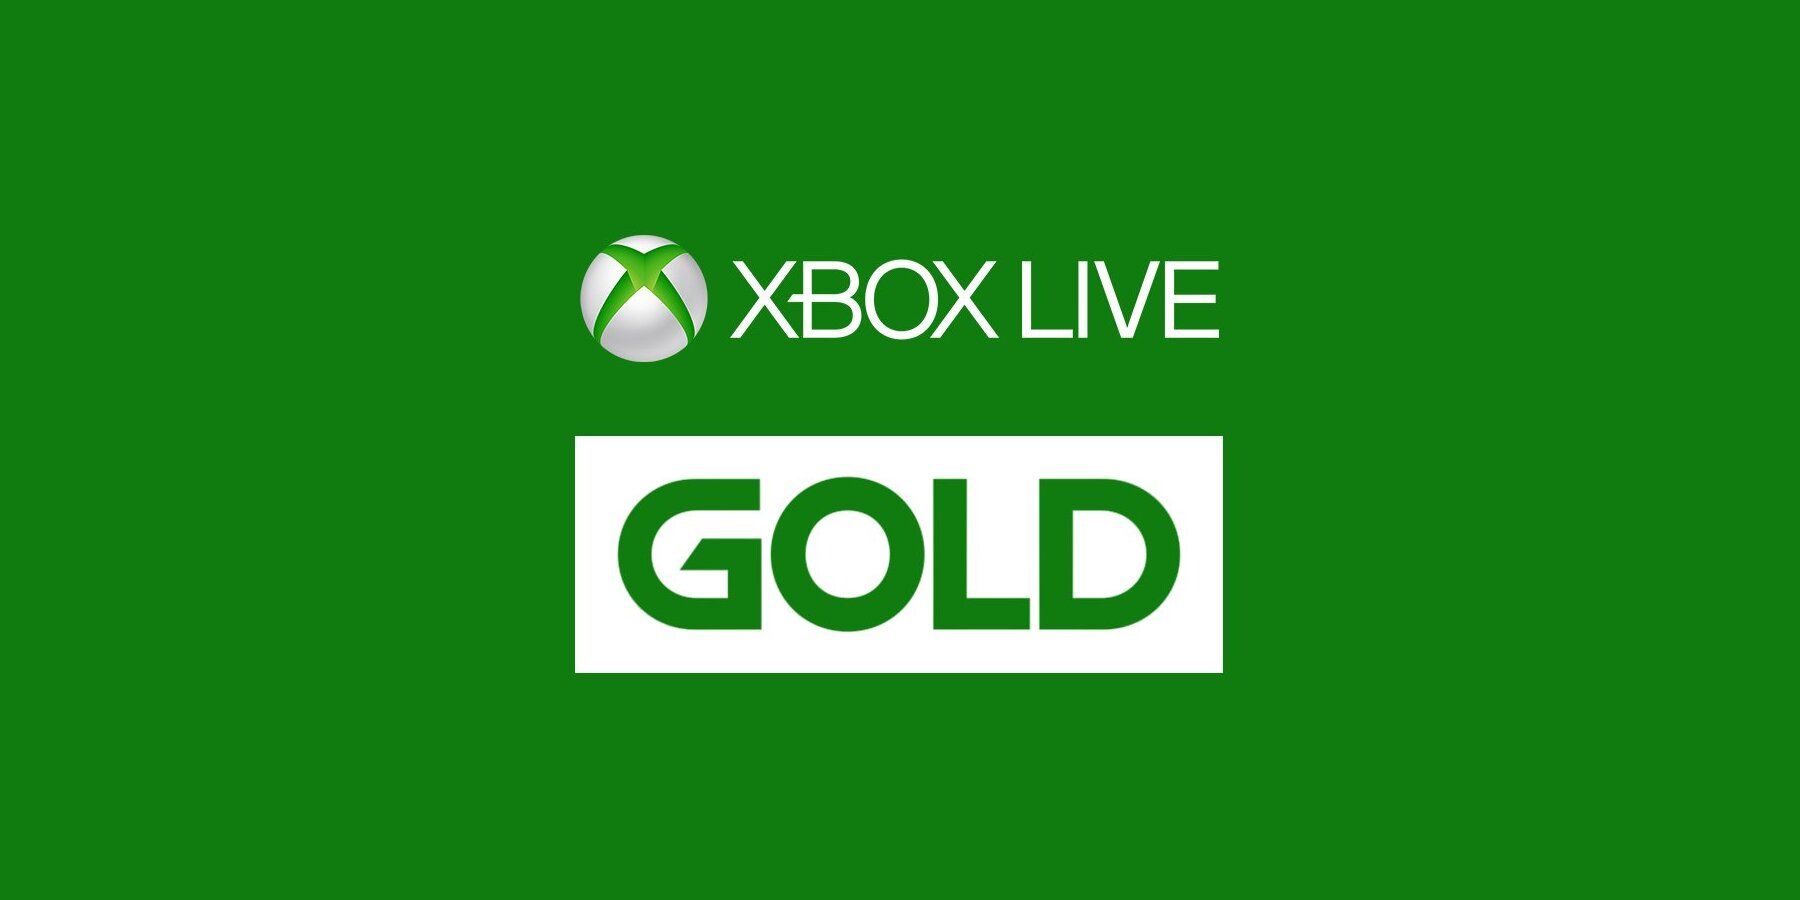 Xbox Games with Gold for April 2021 revealed, with 3,200